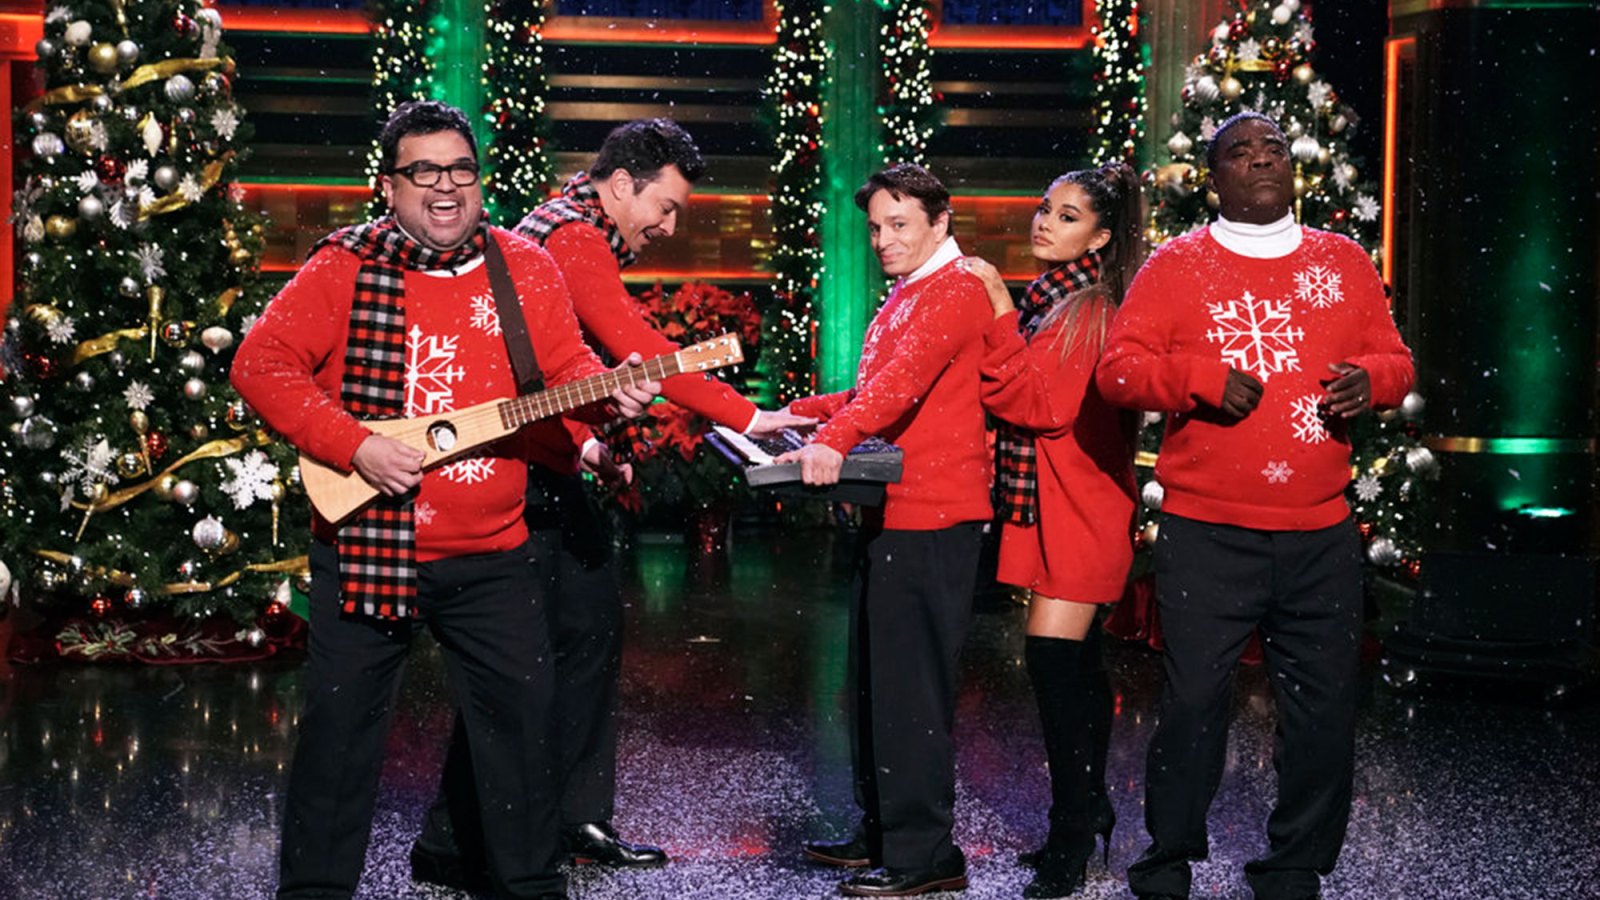 Ariana Grande Recreates "I Wish It Was Christmas Today' With Jimmy Fallon and His Former 'SNL' Cast Members